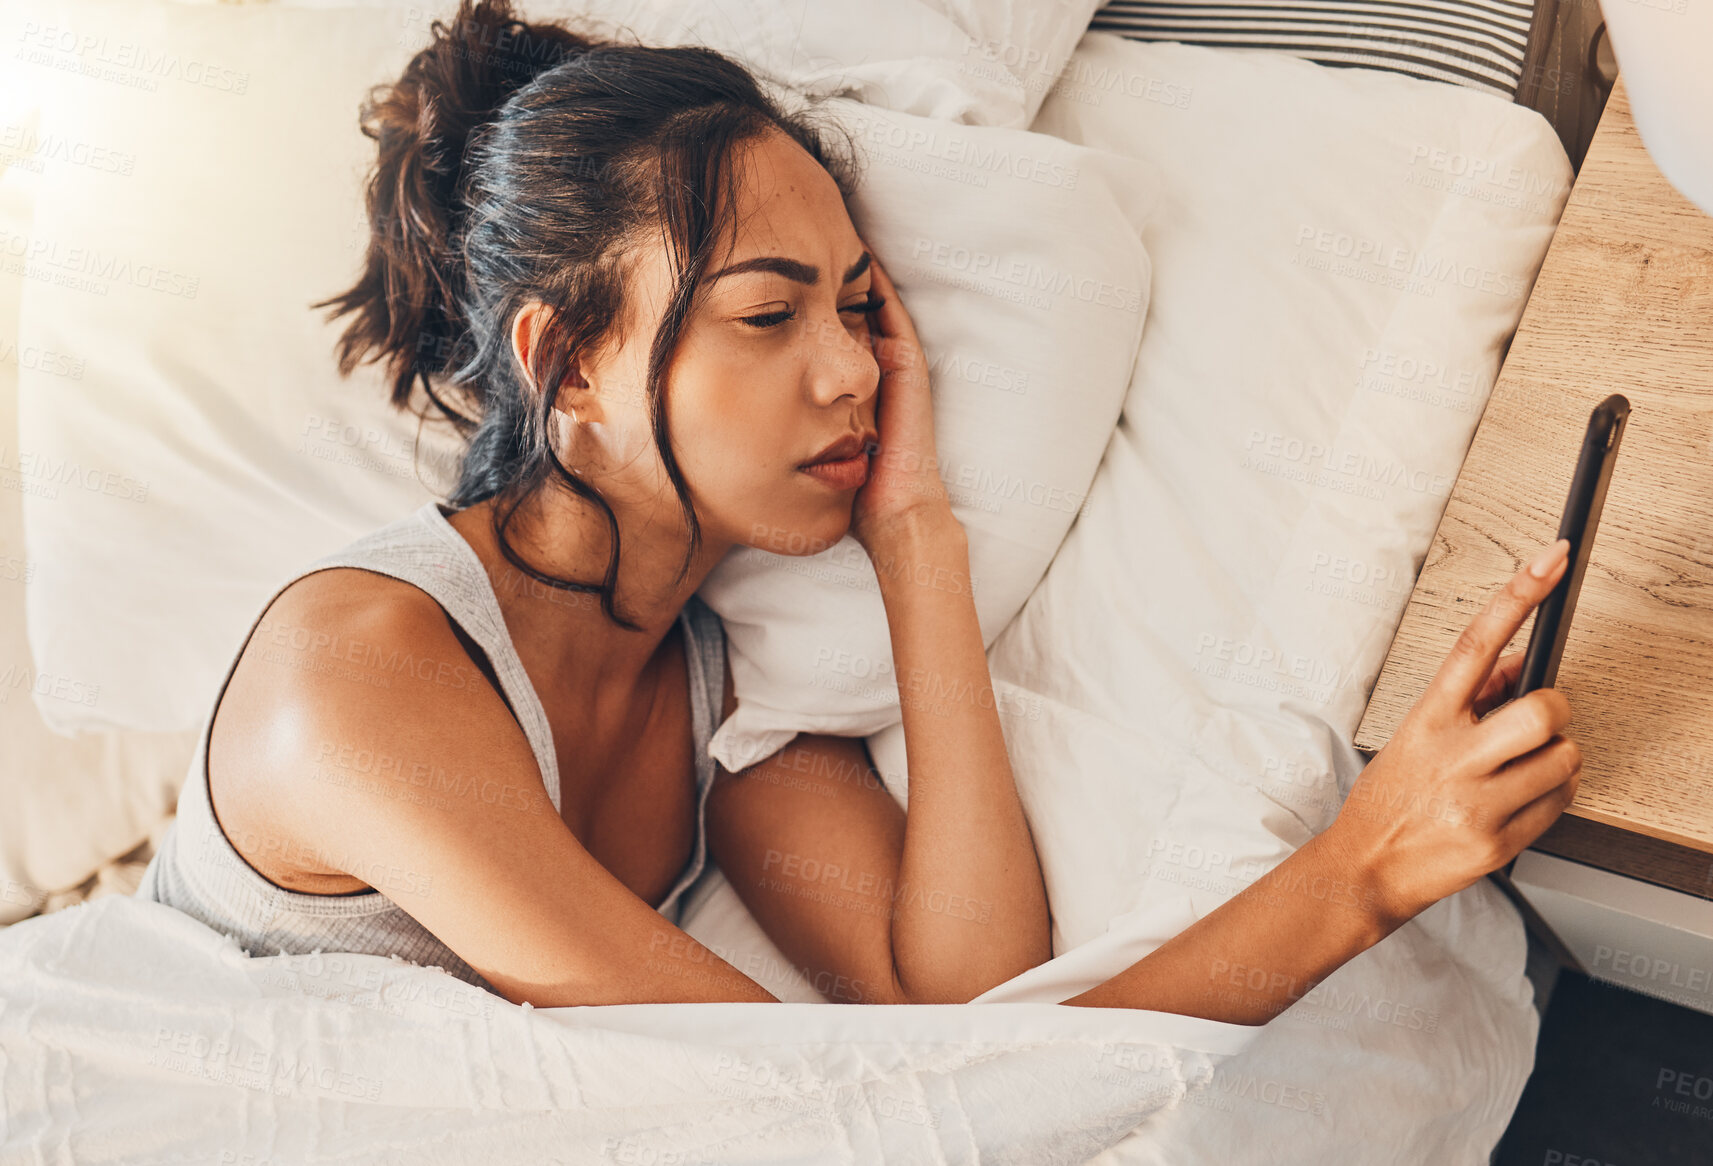 Buy stock photo A young mixed race woman looking depressed while scrolling social media and lying in bed. An attractive Hispanic female using her cellphone and looking exhausted while resting in her bedroom